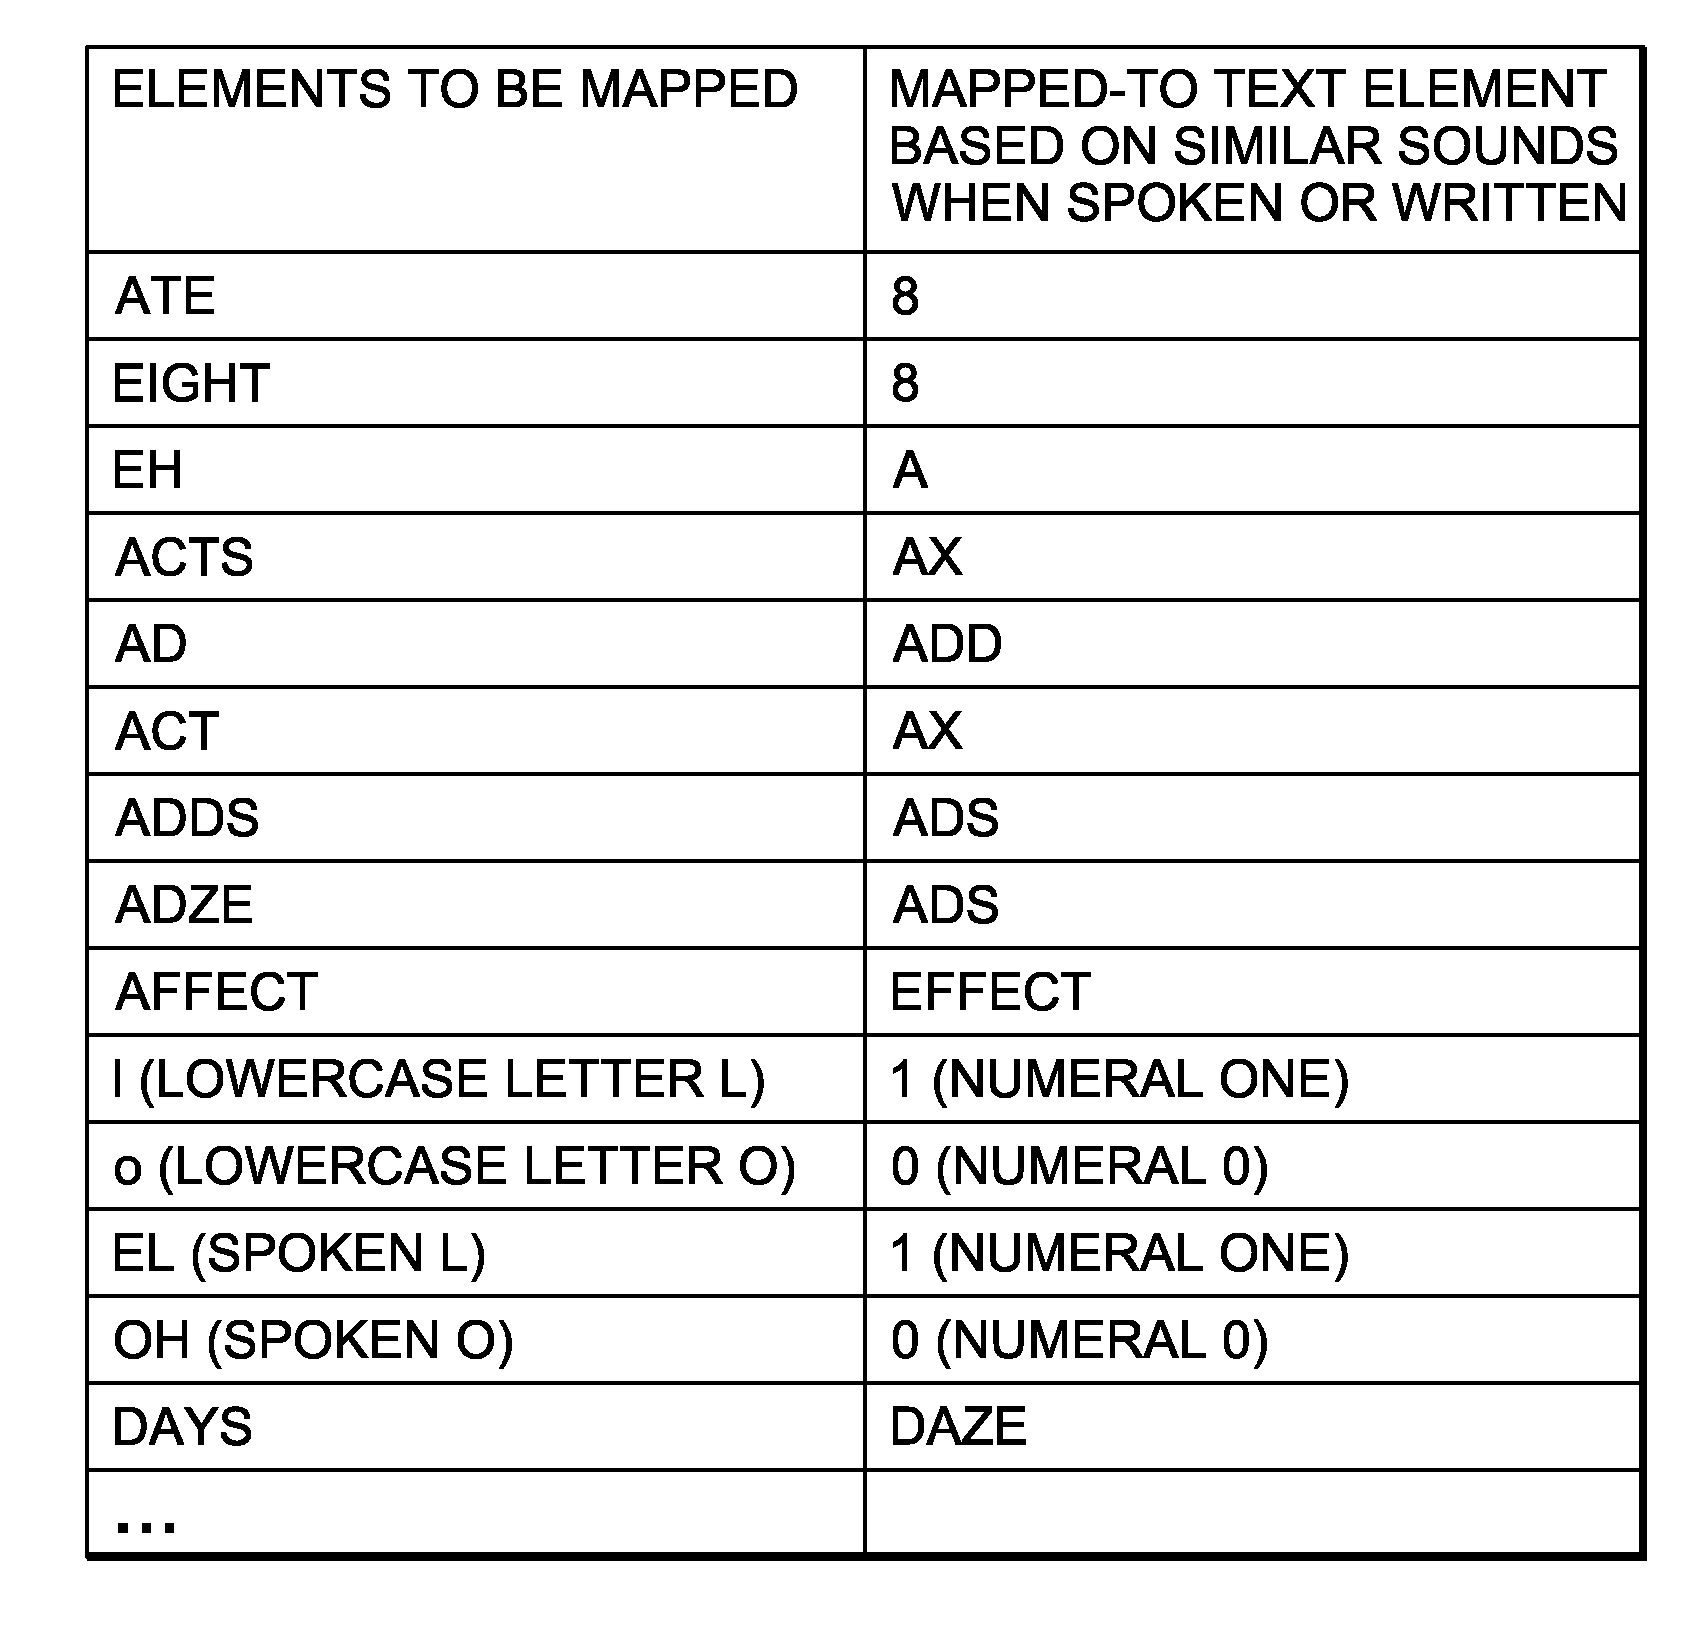 Method for reducing errors while transferring tokens to and from people